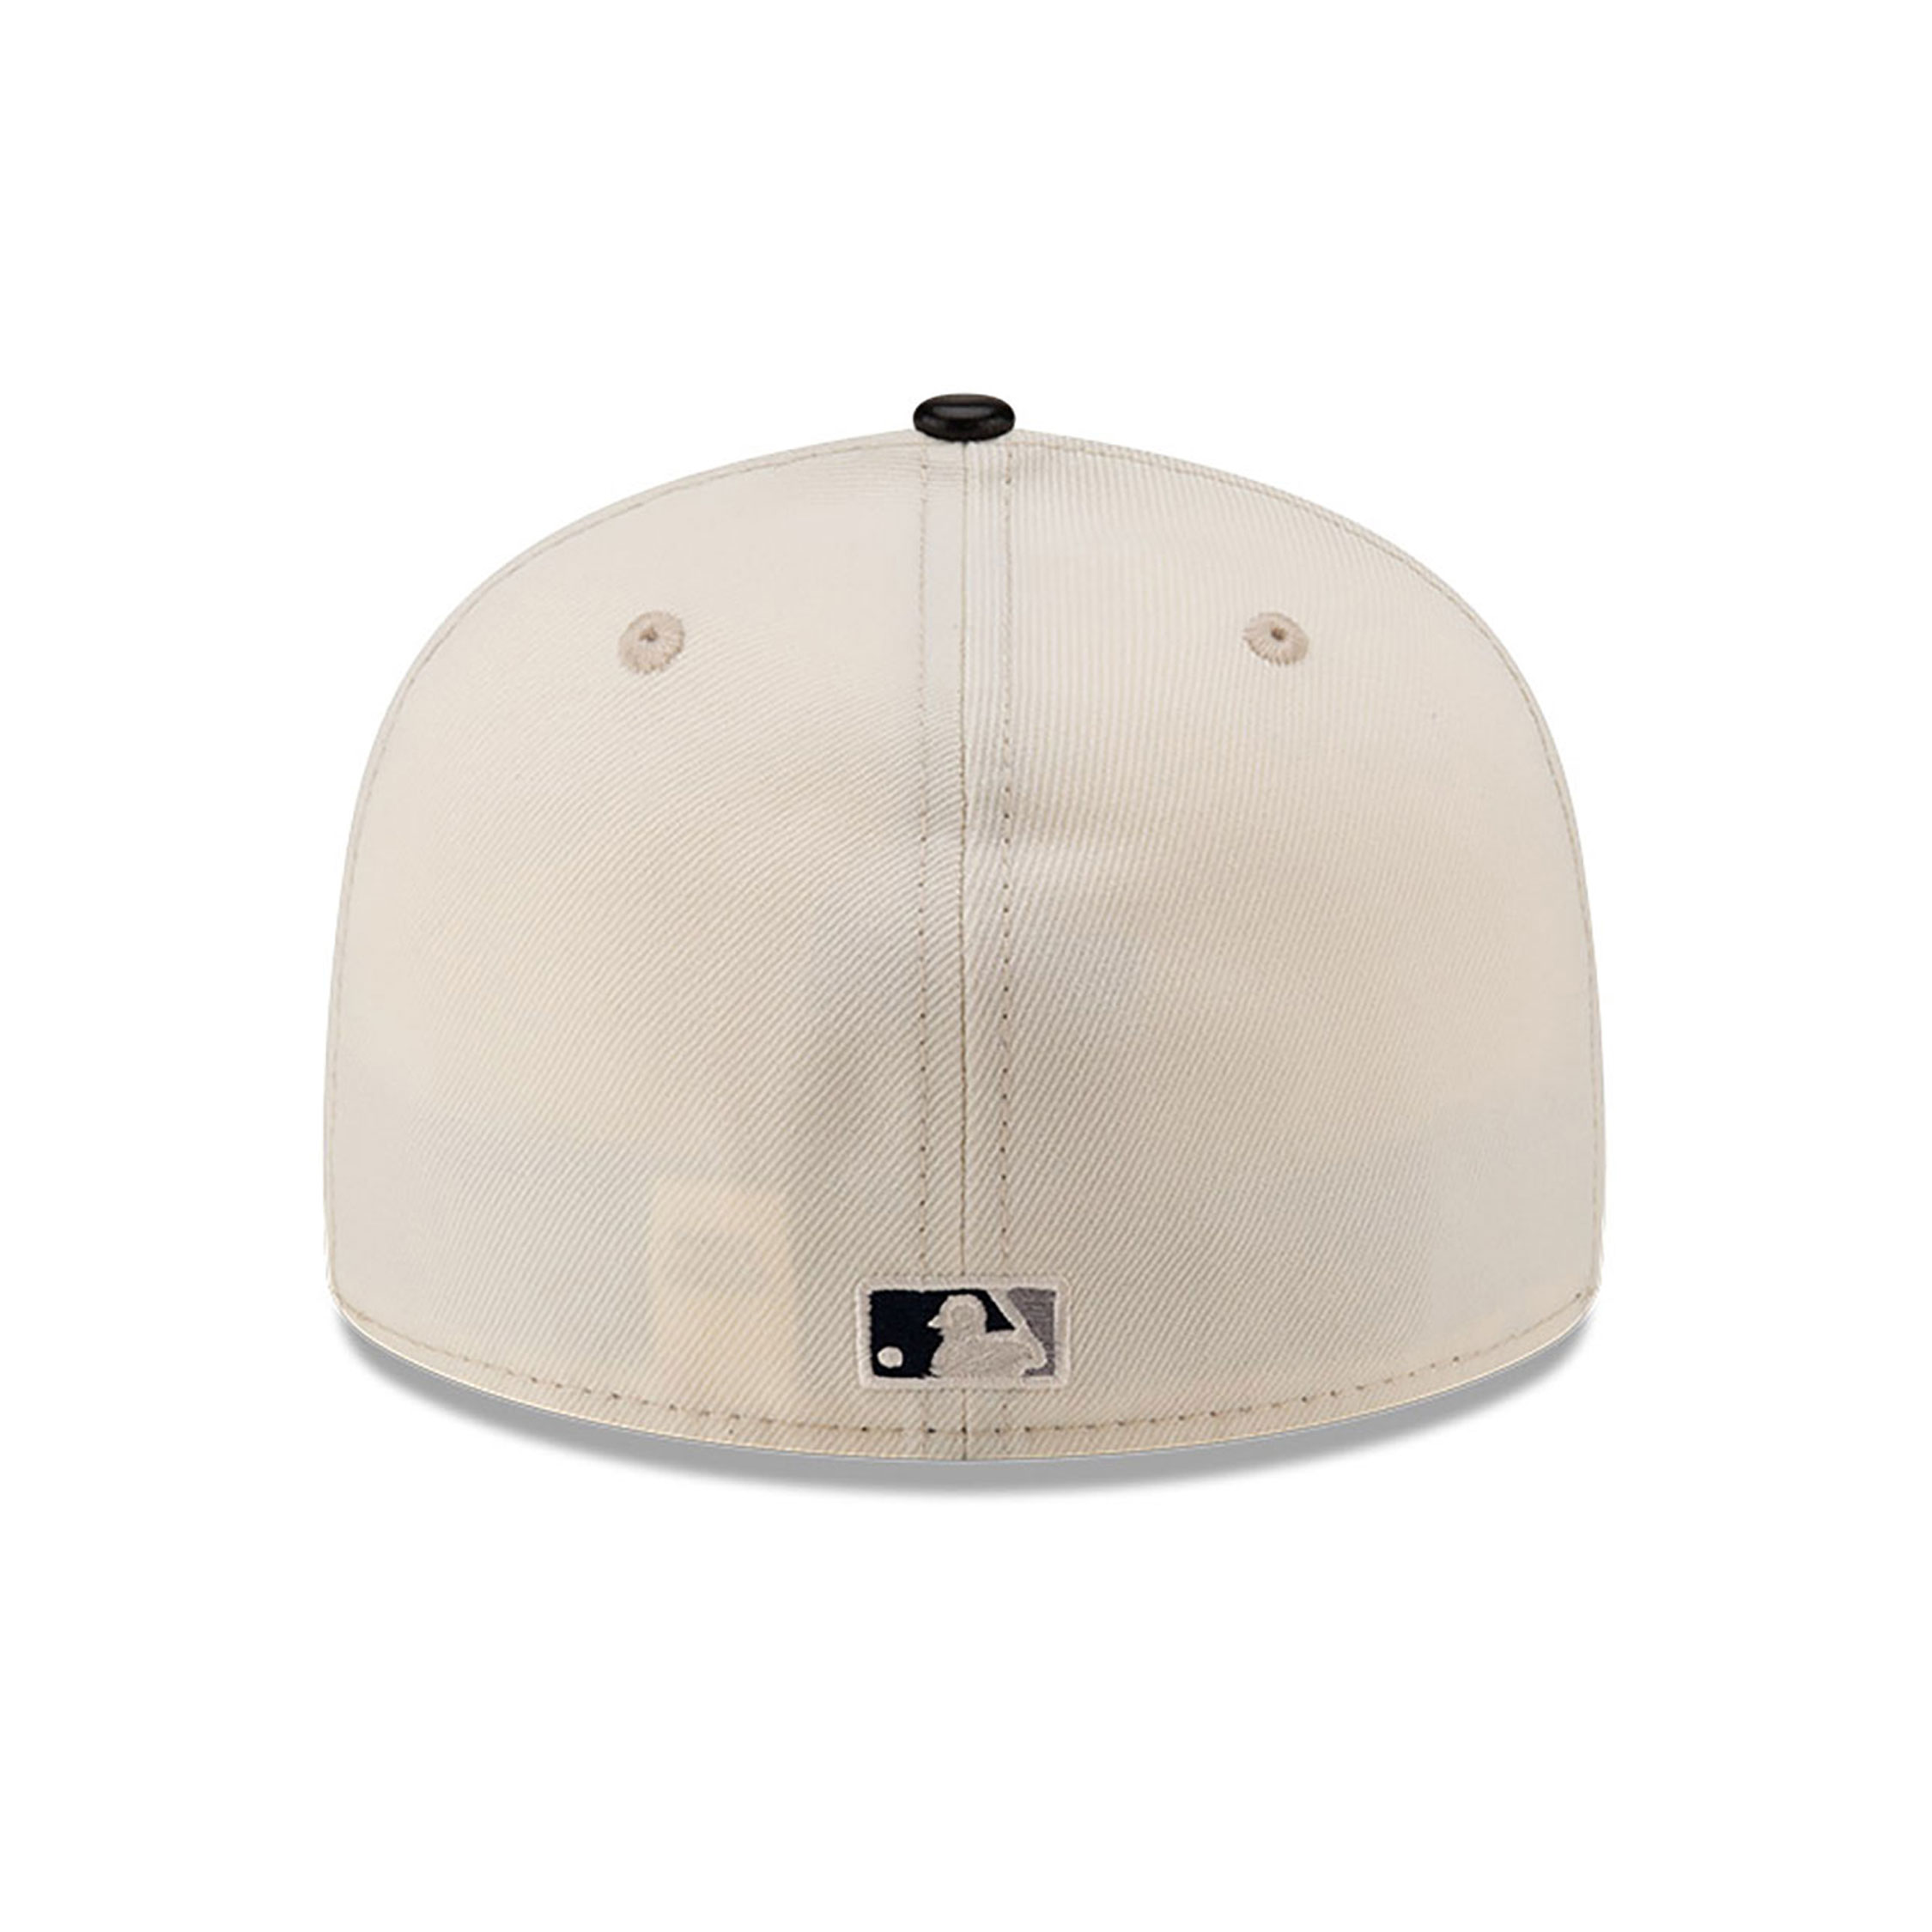 New York Yankees Leather Visor Chome White 59FIFTY Fitted Cap